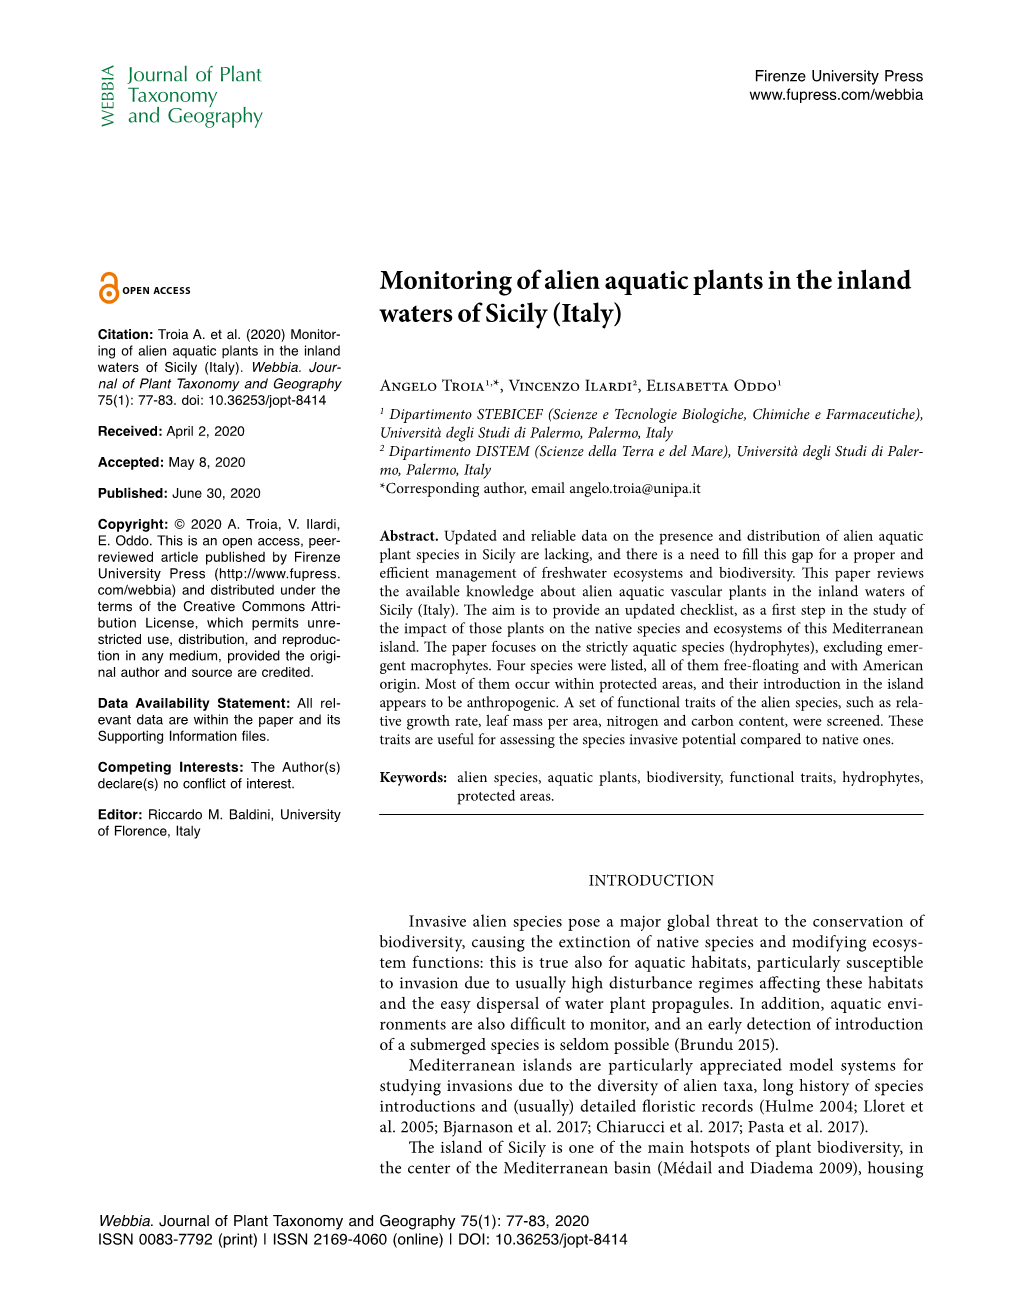 Monitoring of Alien Aquatic Plants in the Inland Waters of Sicily (Italy) Citation: Troia A